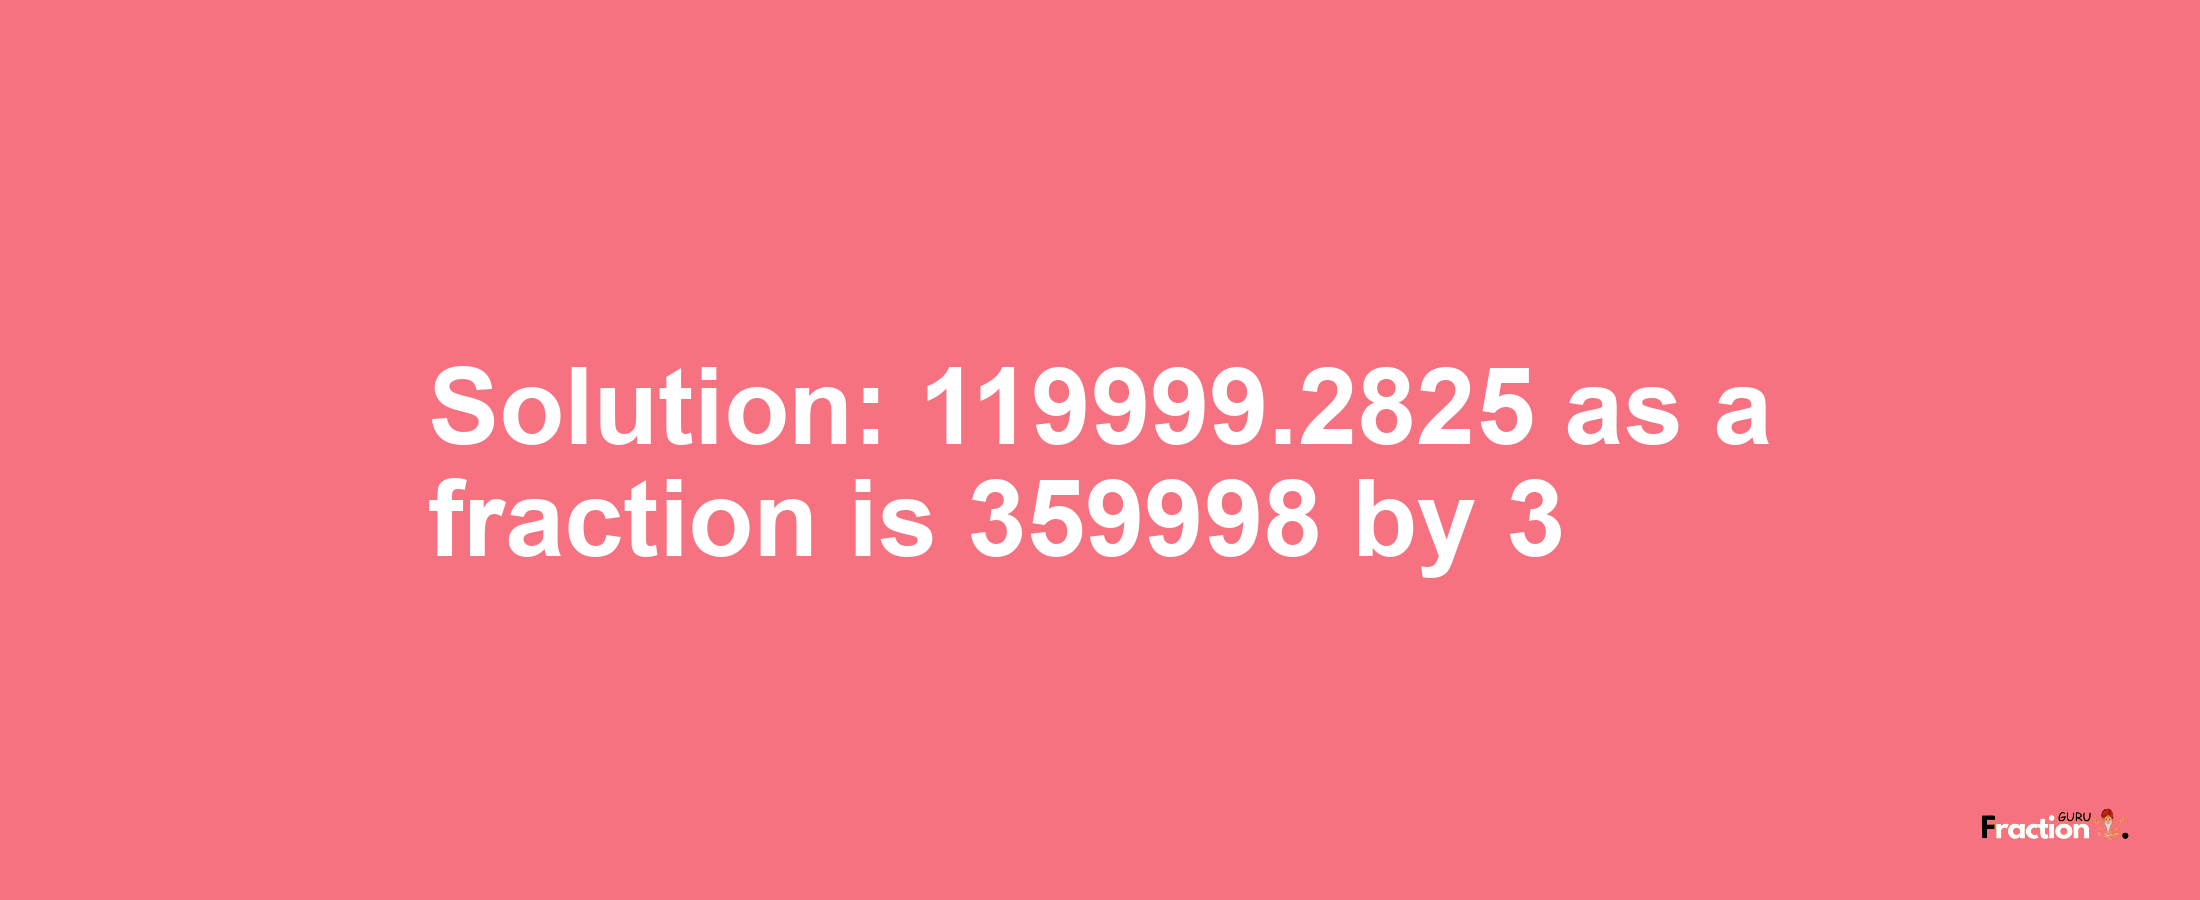 Solution:119999.2825 as a fraction is 359998/3